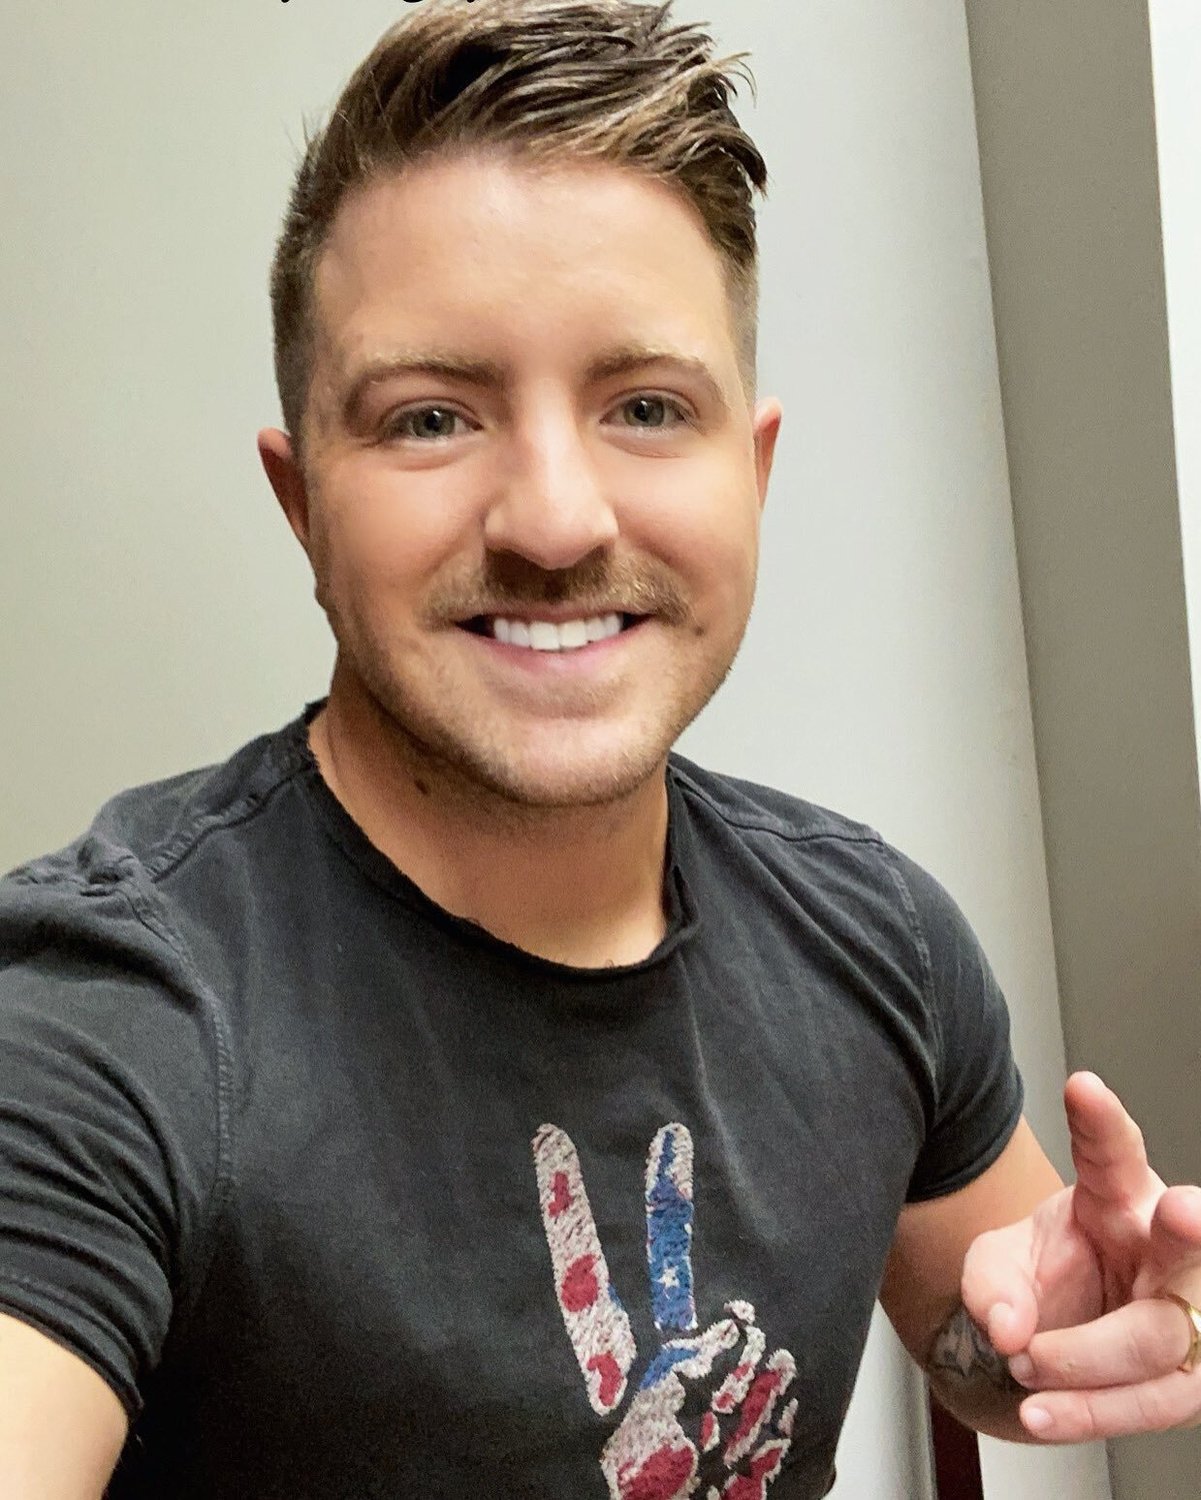 Country artist Billy Gilman — who was thrust into the spotlight as a child with this top-40 hit “One Voice” — will grace the stage next Friday, Aug. 6, for the Chehalis Music in the Park series.